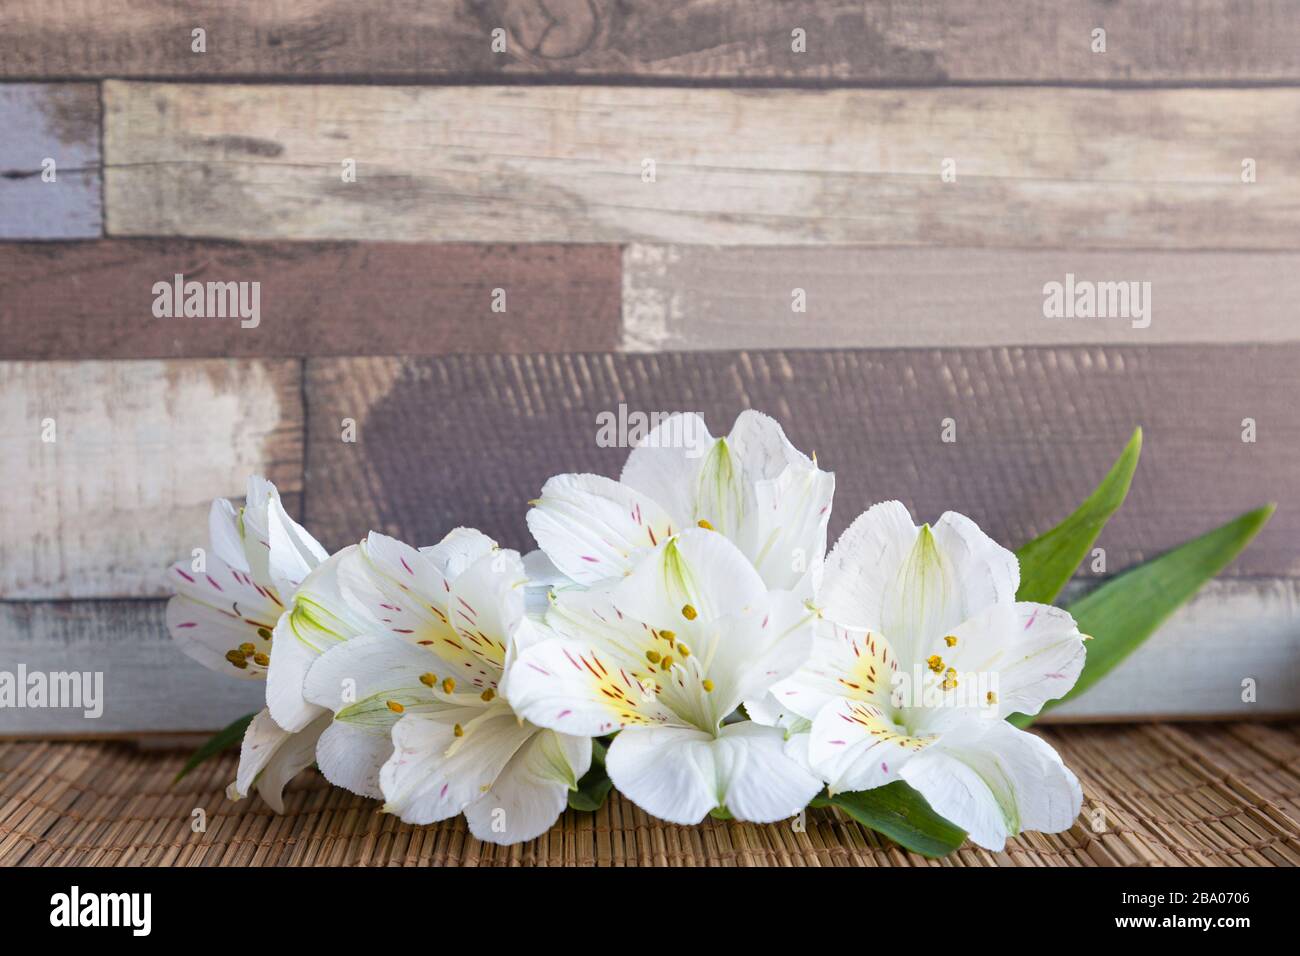 Background with White Alstroemeria flowers or Peruvian lily or Lily of the Incas with natural wooden background Stock Photo